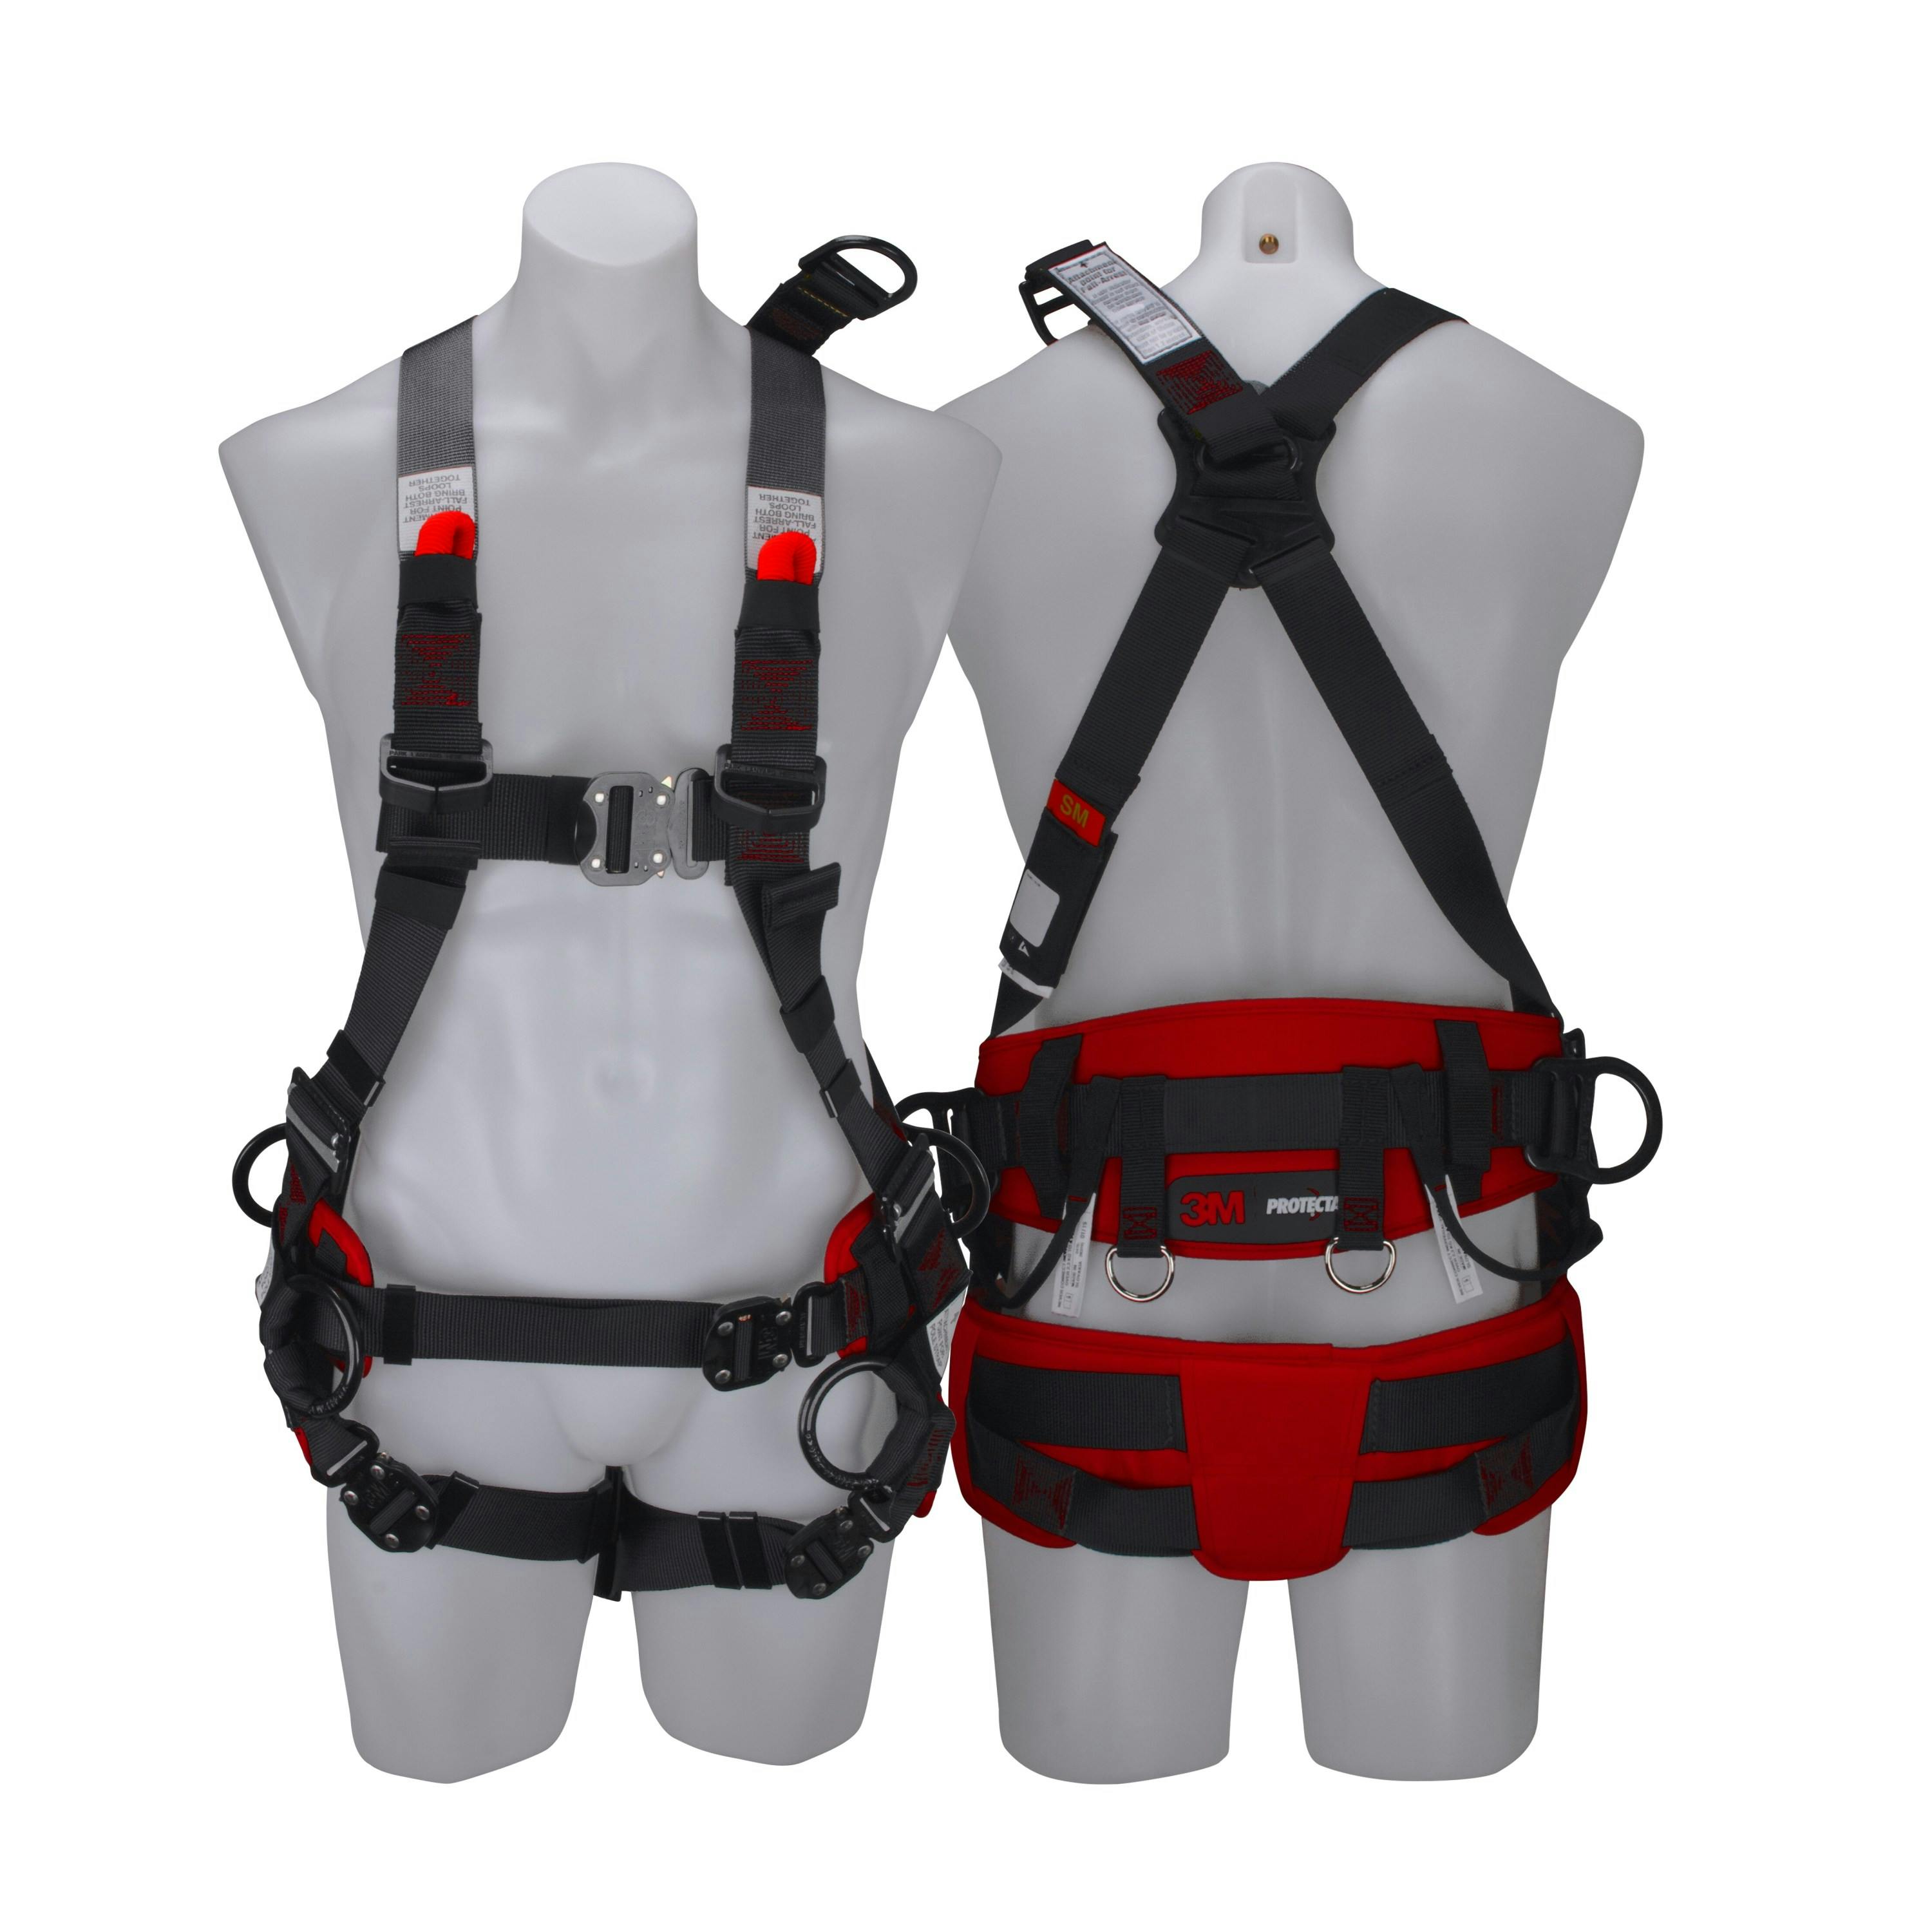 3M™ PROTECTA® X Tower Workers Harness with O-Rings 1161699, Red and Black, Extra Large, 1 EA/Case